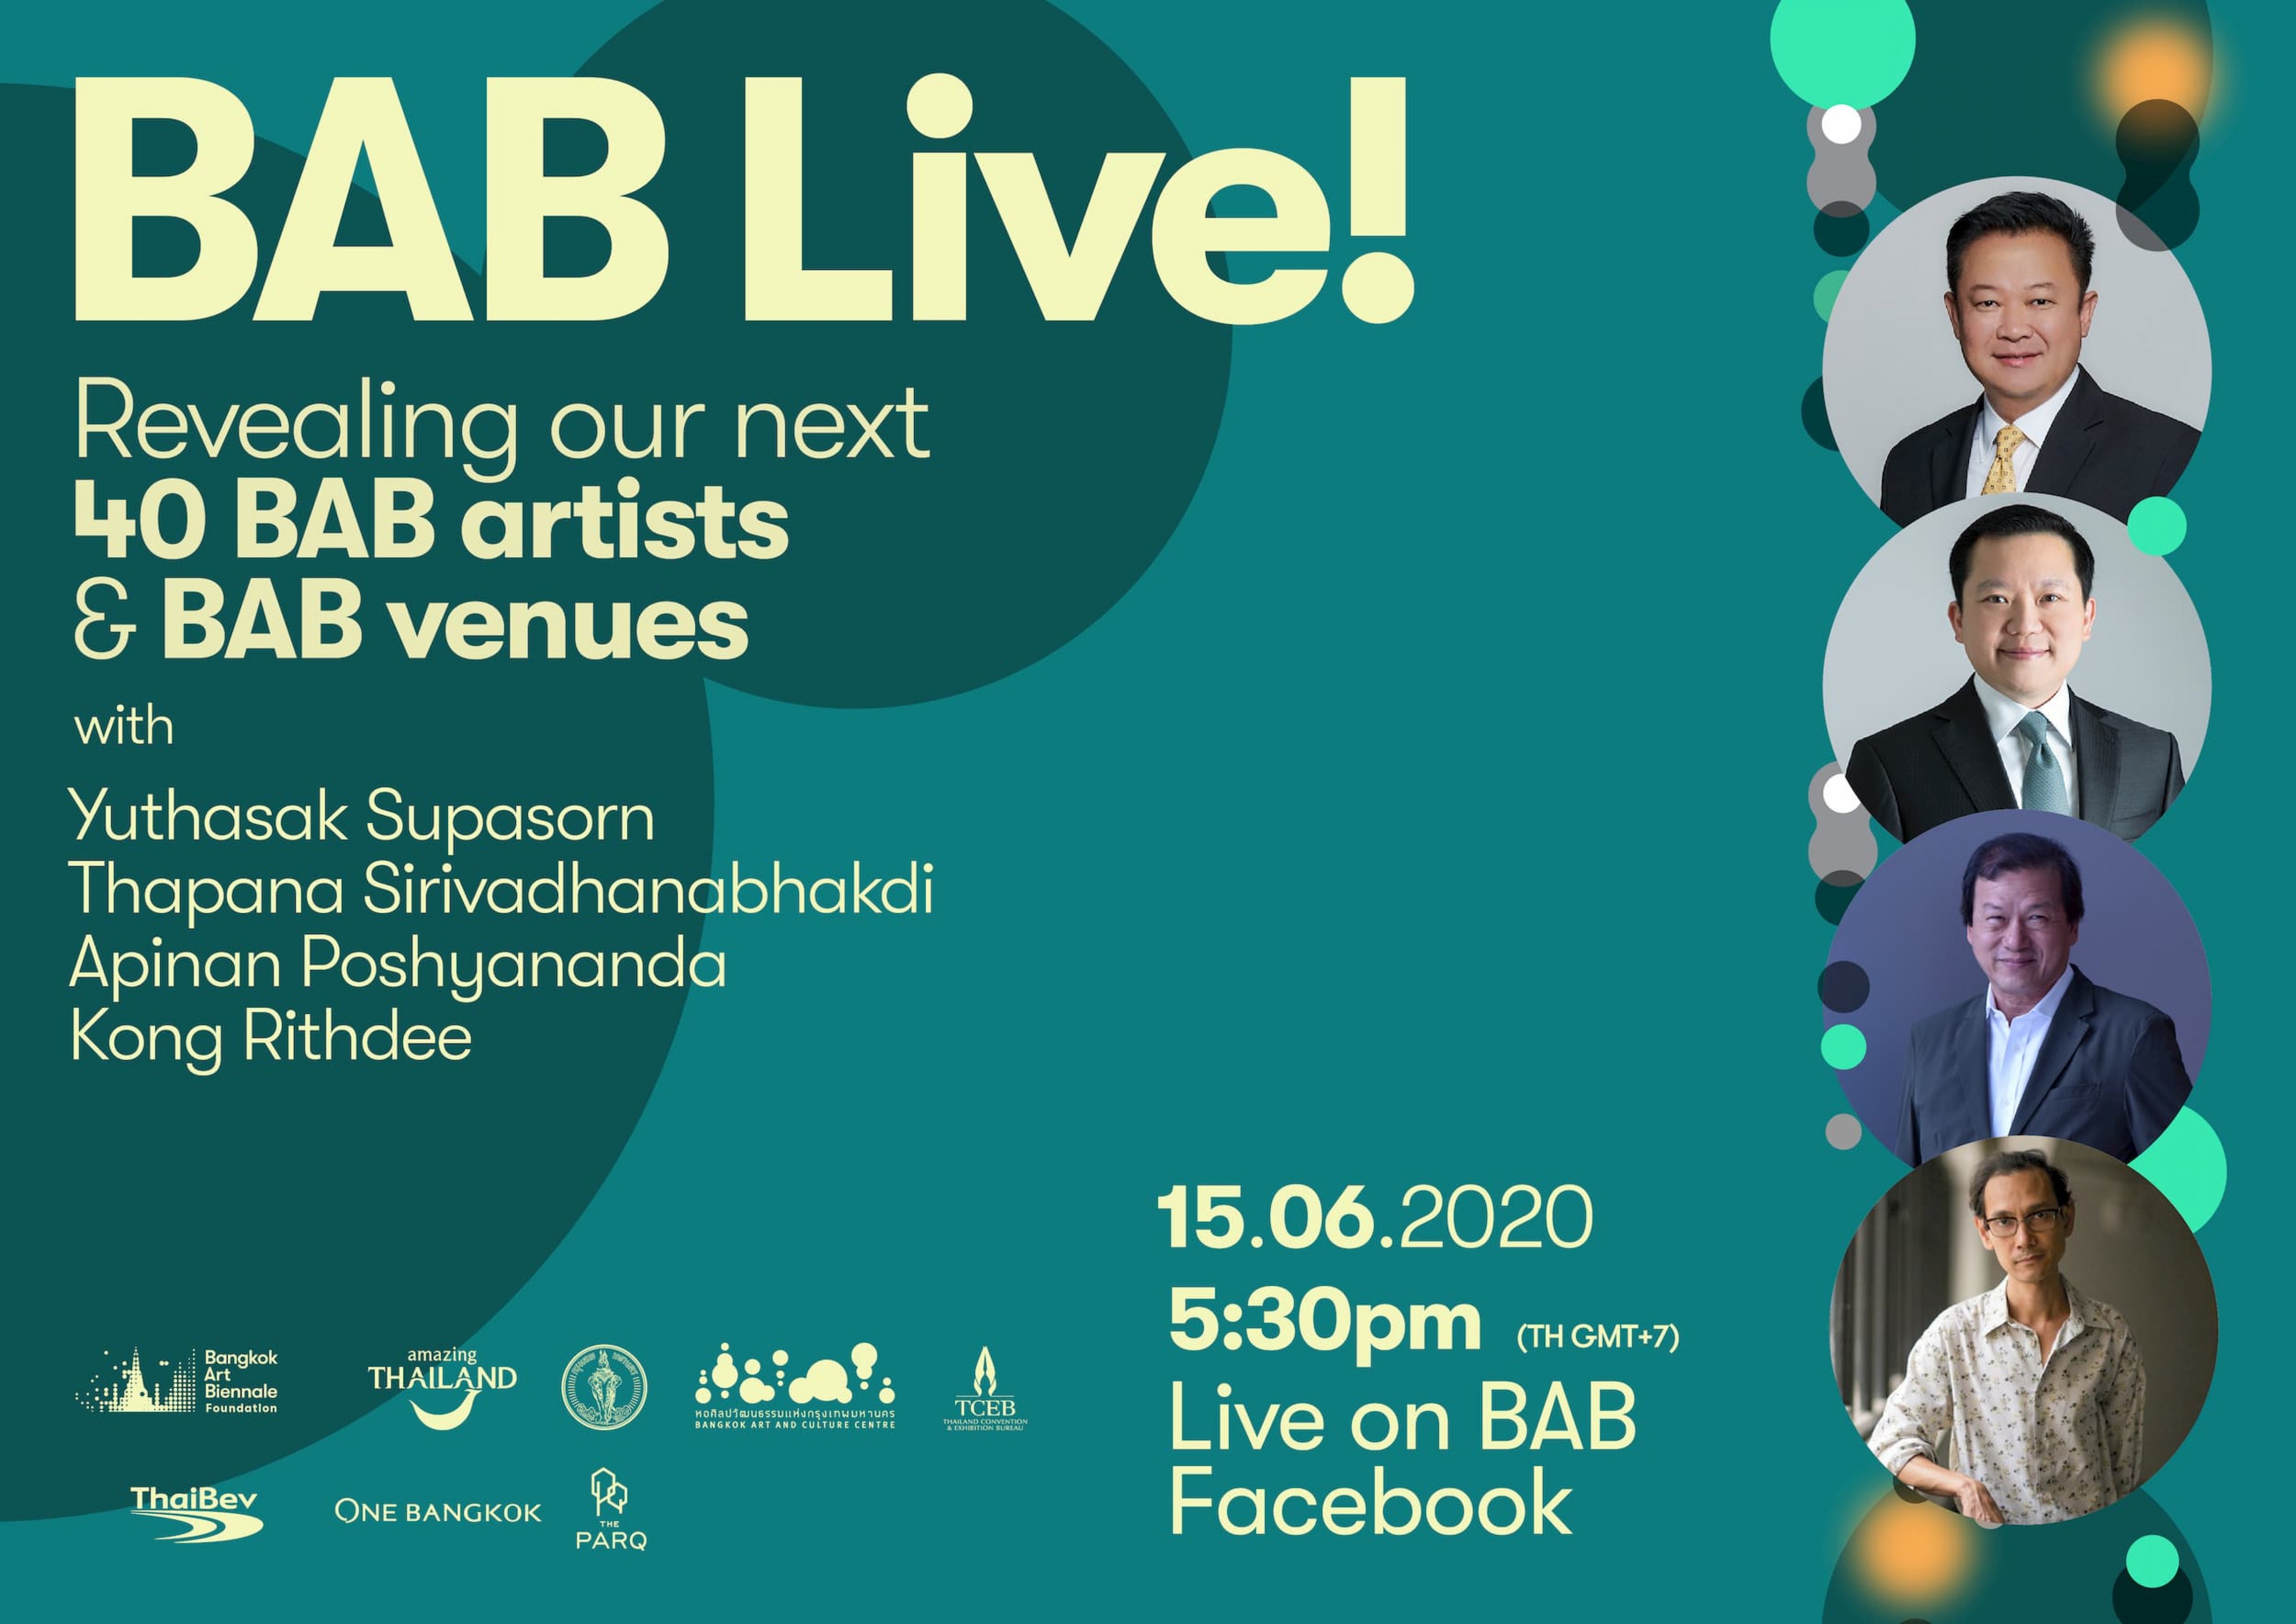 BAB Live! Revealing our next 40 BAB 2020 Artists & Venues